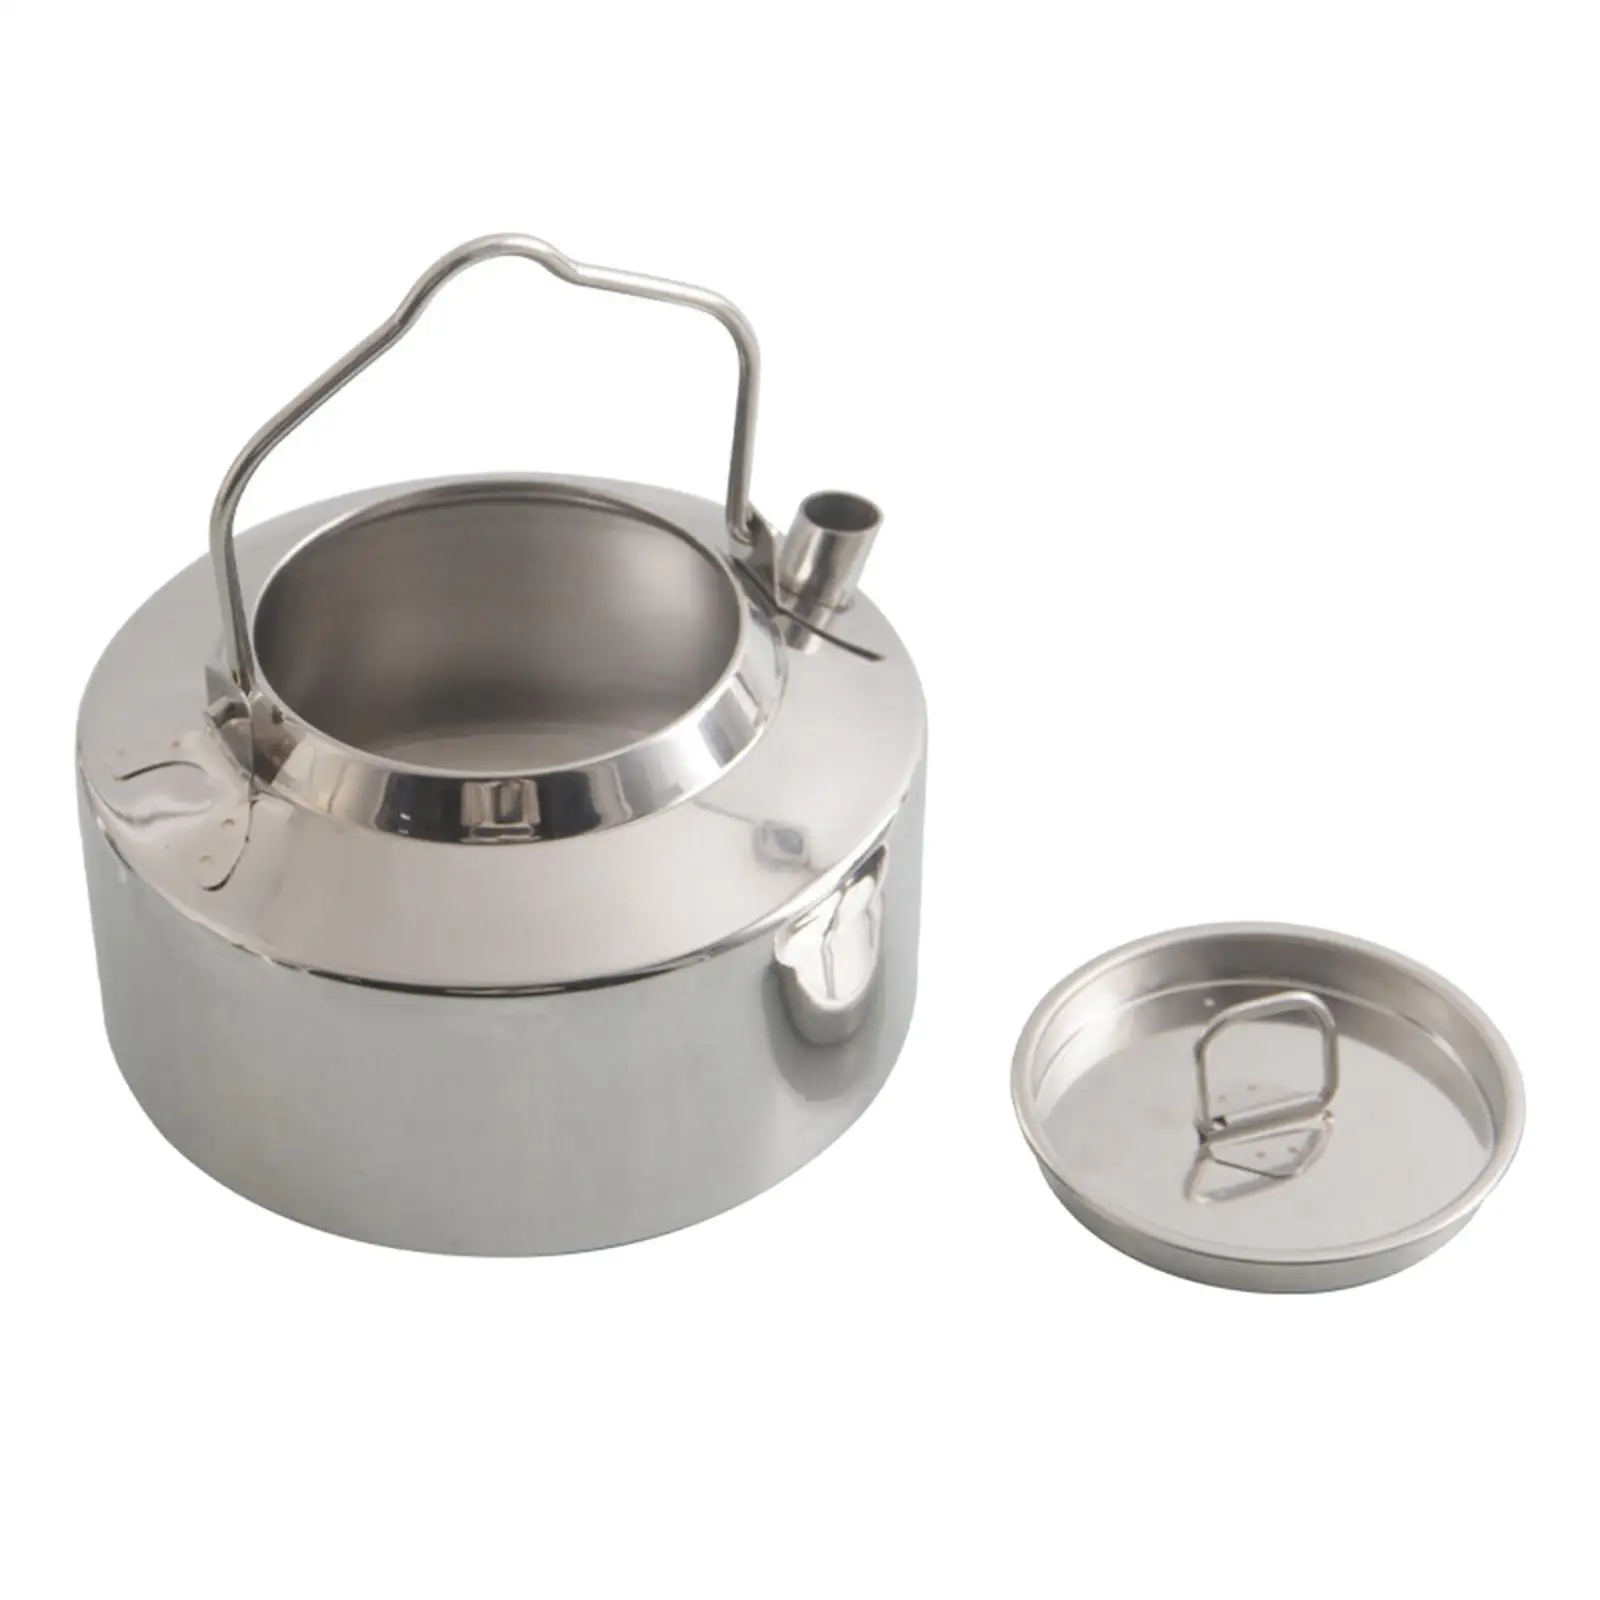 

Outdoor Camping Kettle Durable Pot Ultralight 1.3L Stainless Steel for Campfire Hiking